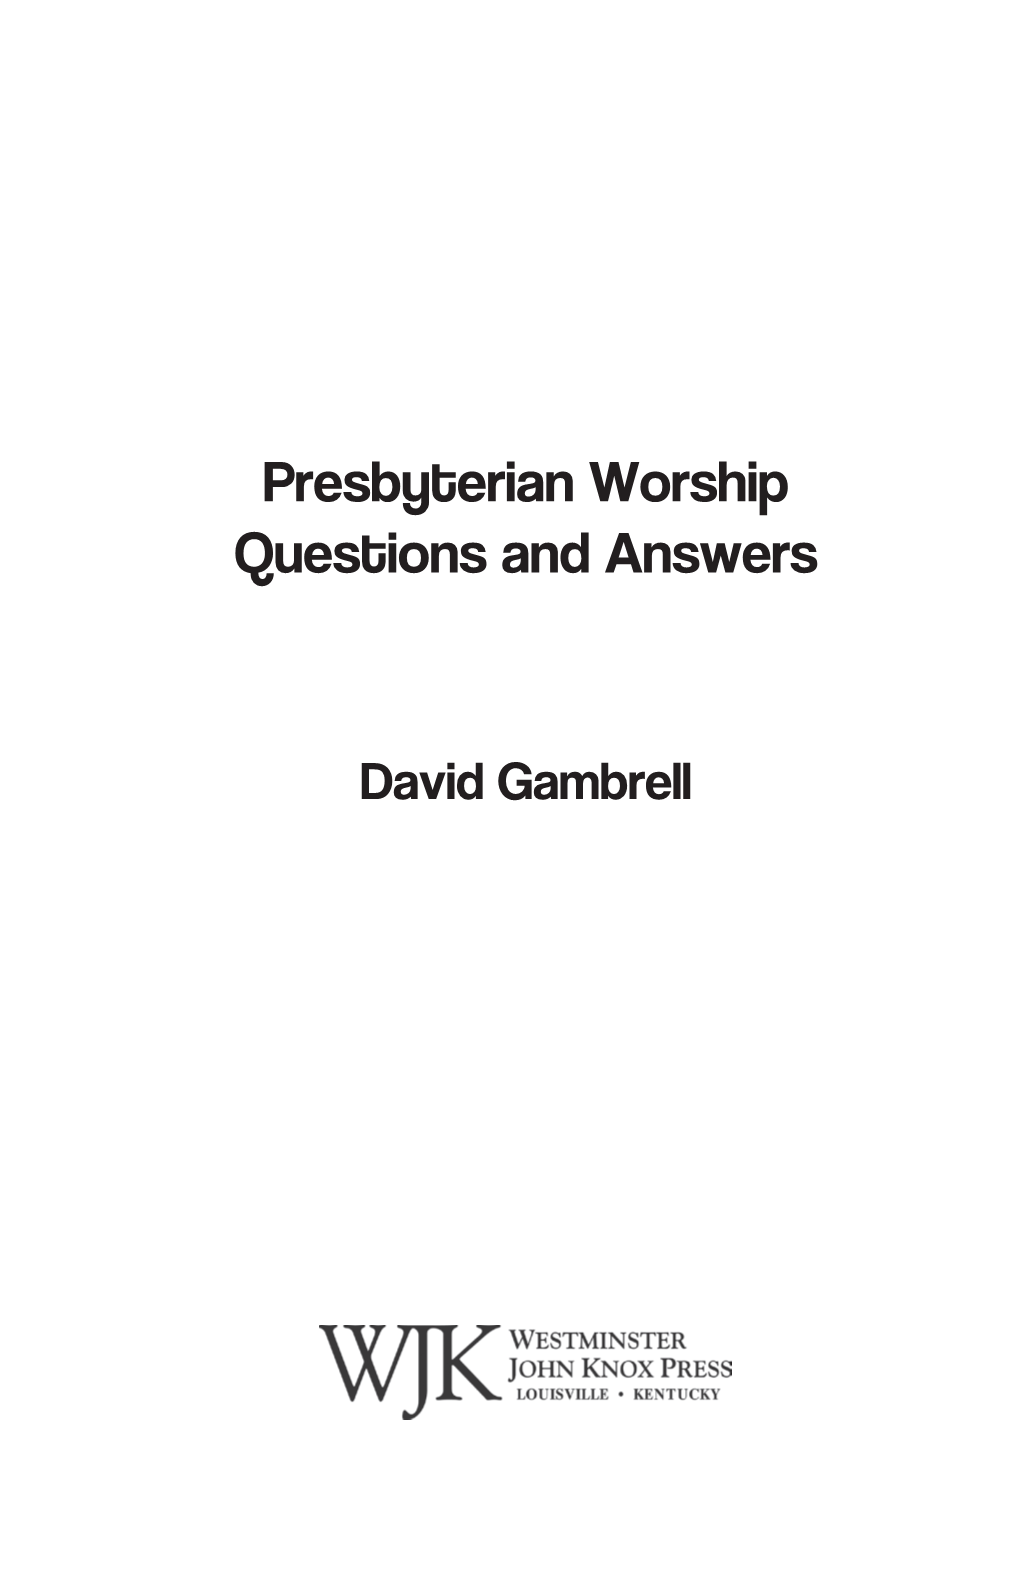 Download Presbyterian Worship Questions and Answers Retail